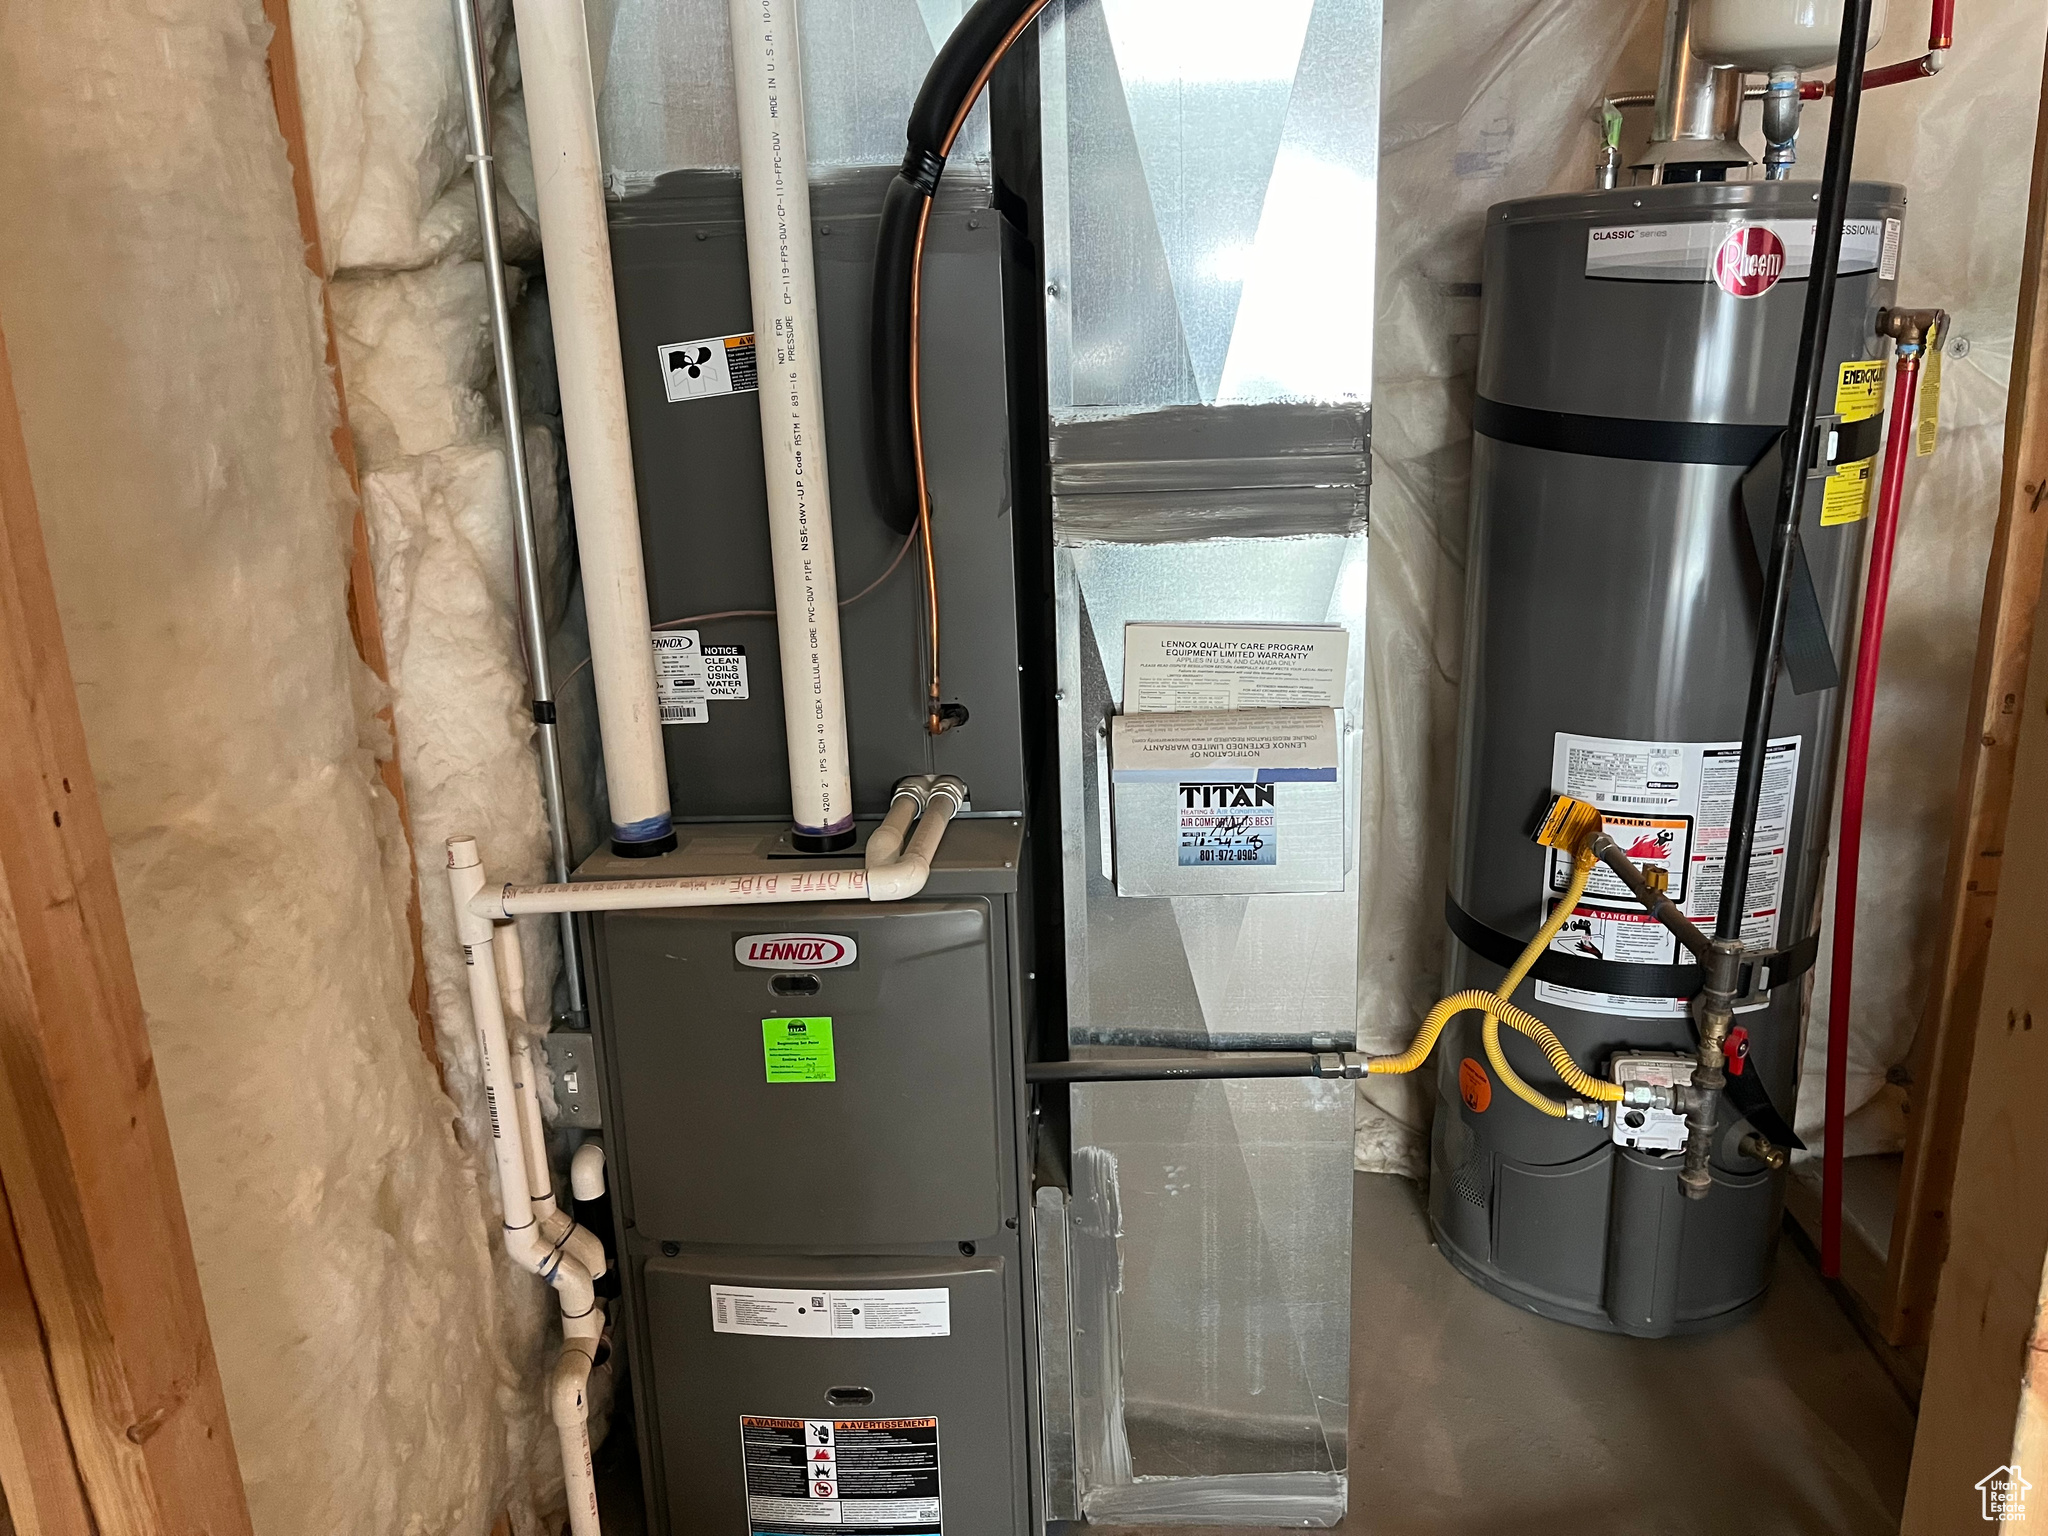 Utility room featuring strapped water heater